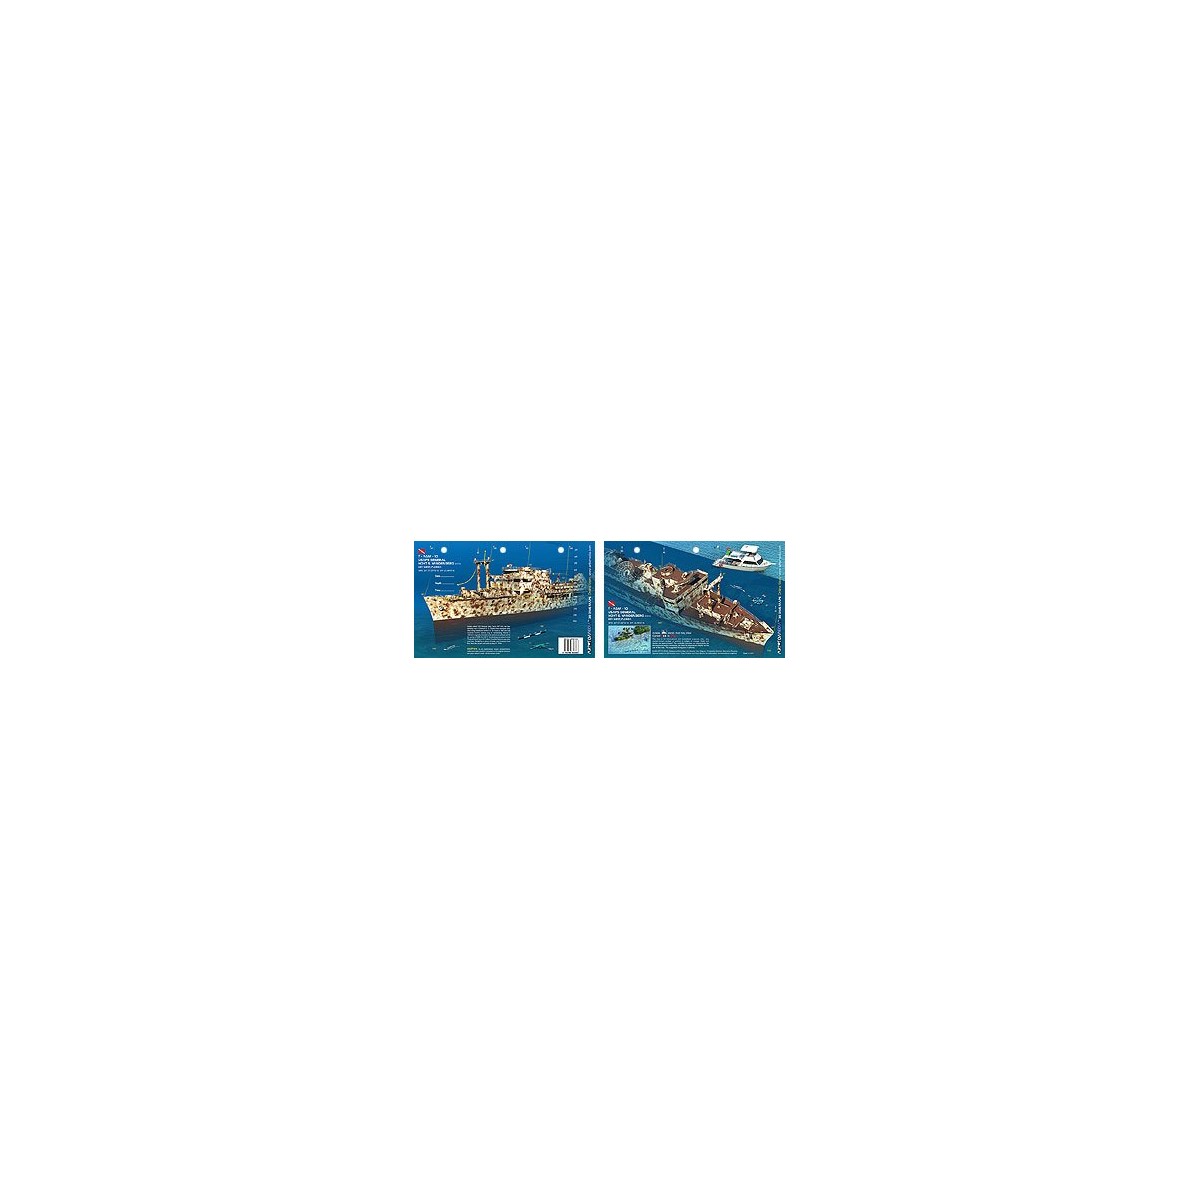 Vandenberg Bow in Key West, Florida (8.5 x 5.5 Inches) (21.6 x 15cm) - New Art to Media Underwater Waterproof 3D Dive Site Map